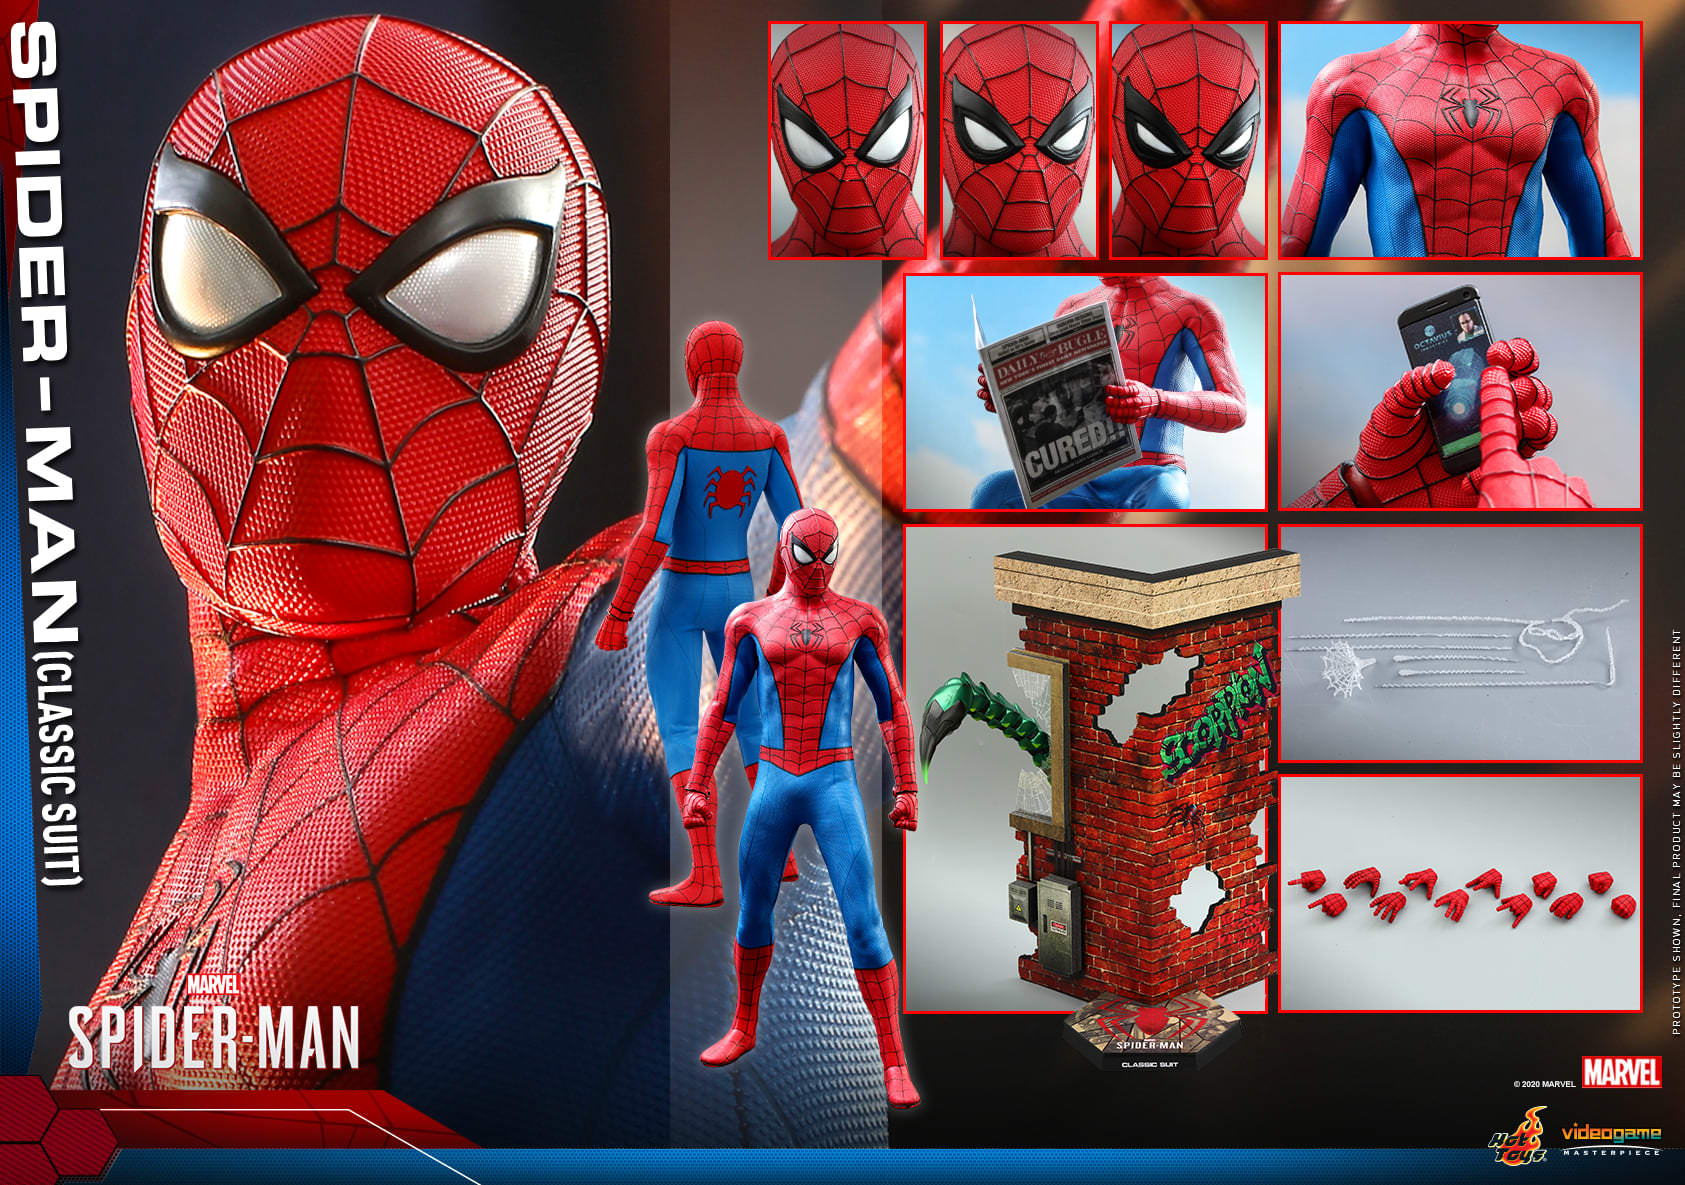 HOT TOYS VGM 48 MARVEL’S SPIDER-MAN – CLASSIC SUIT